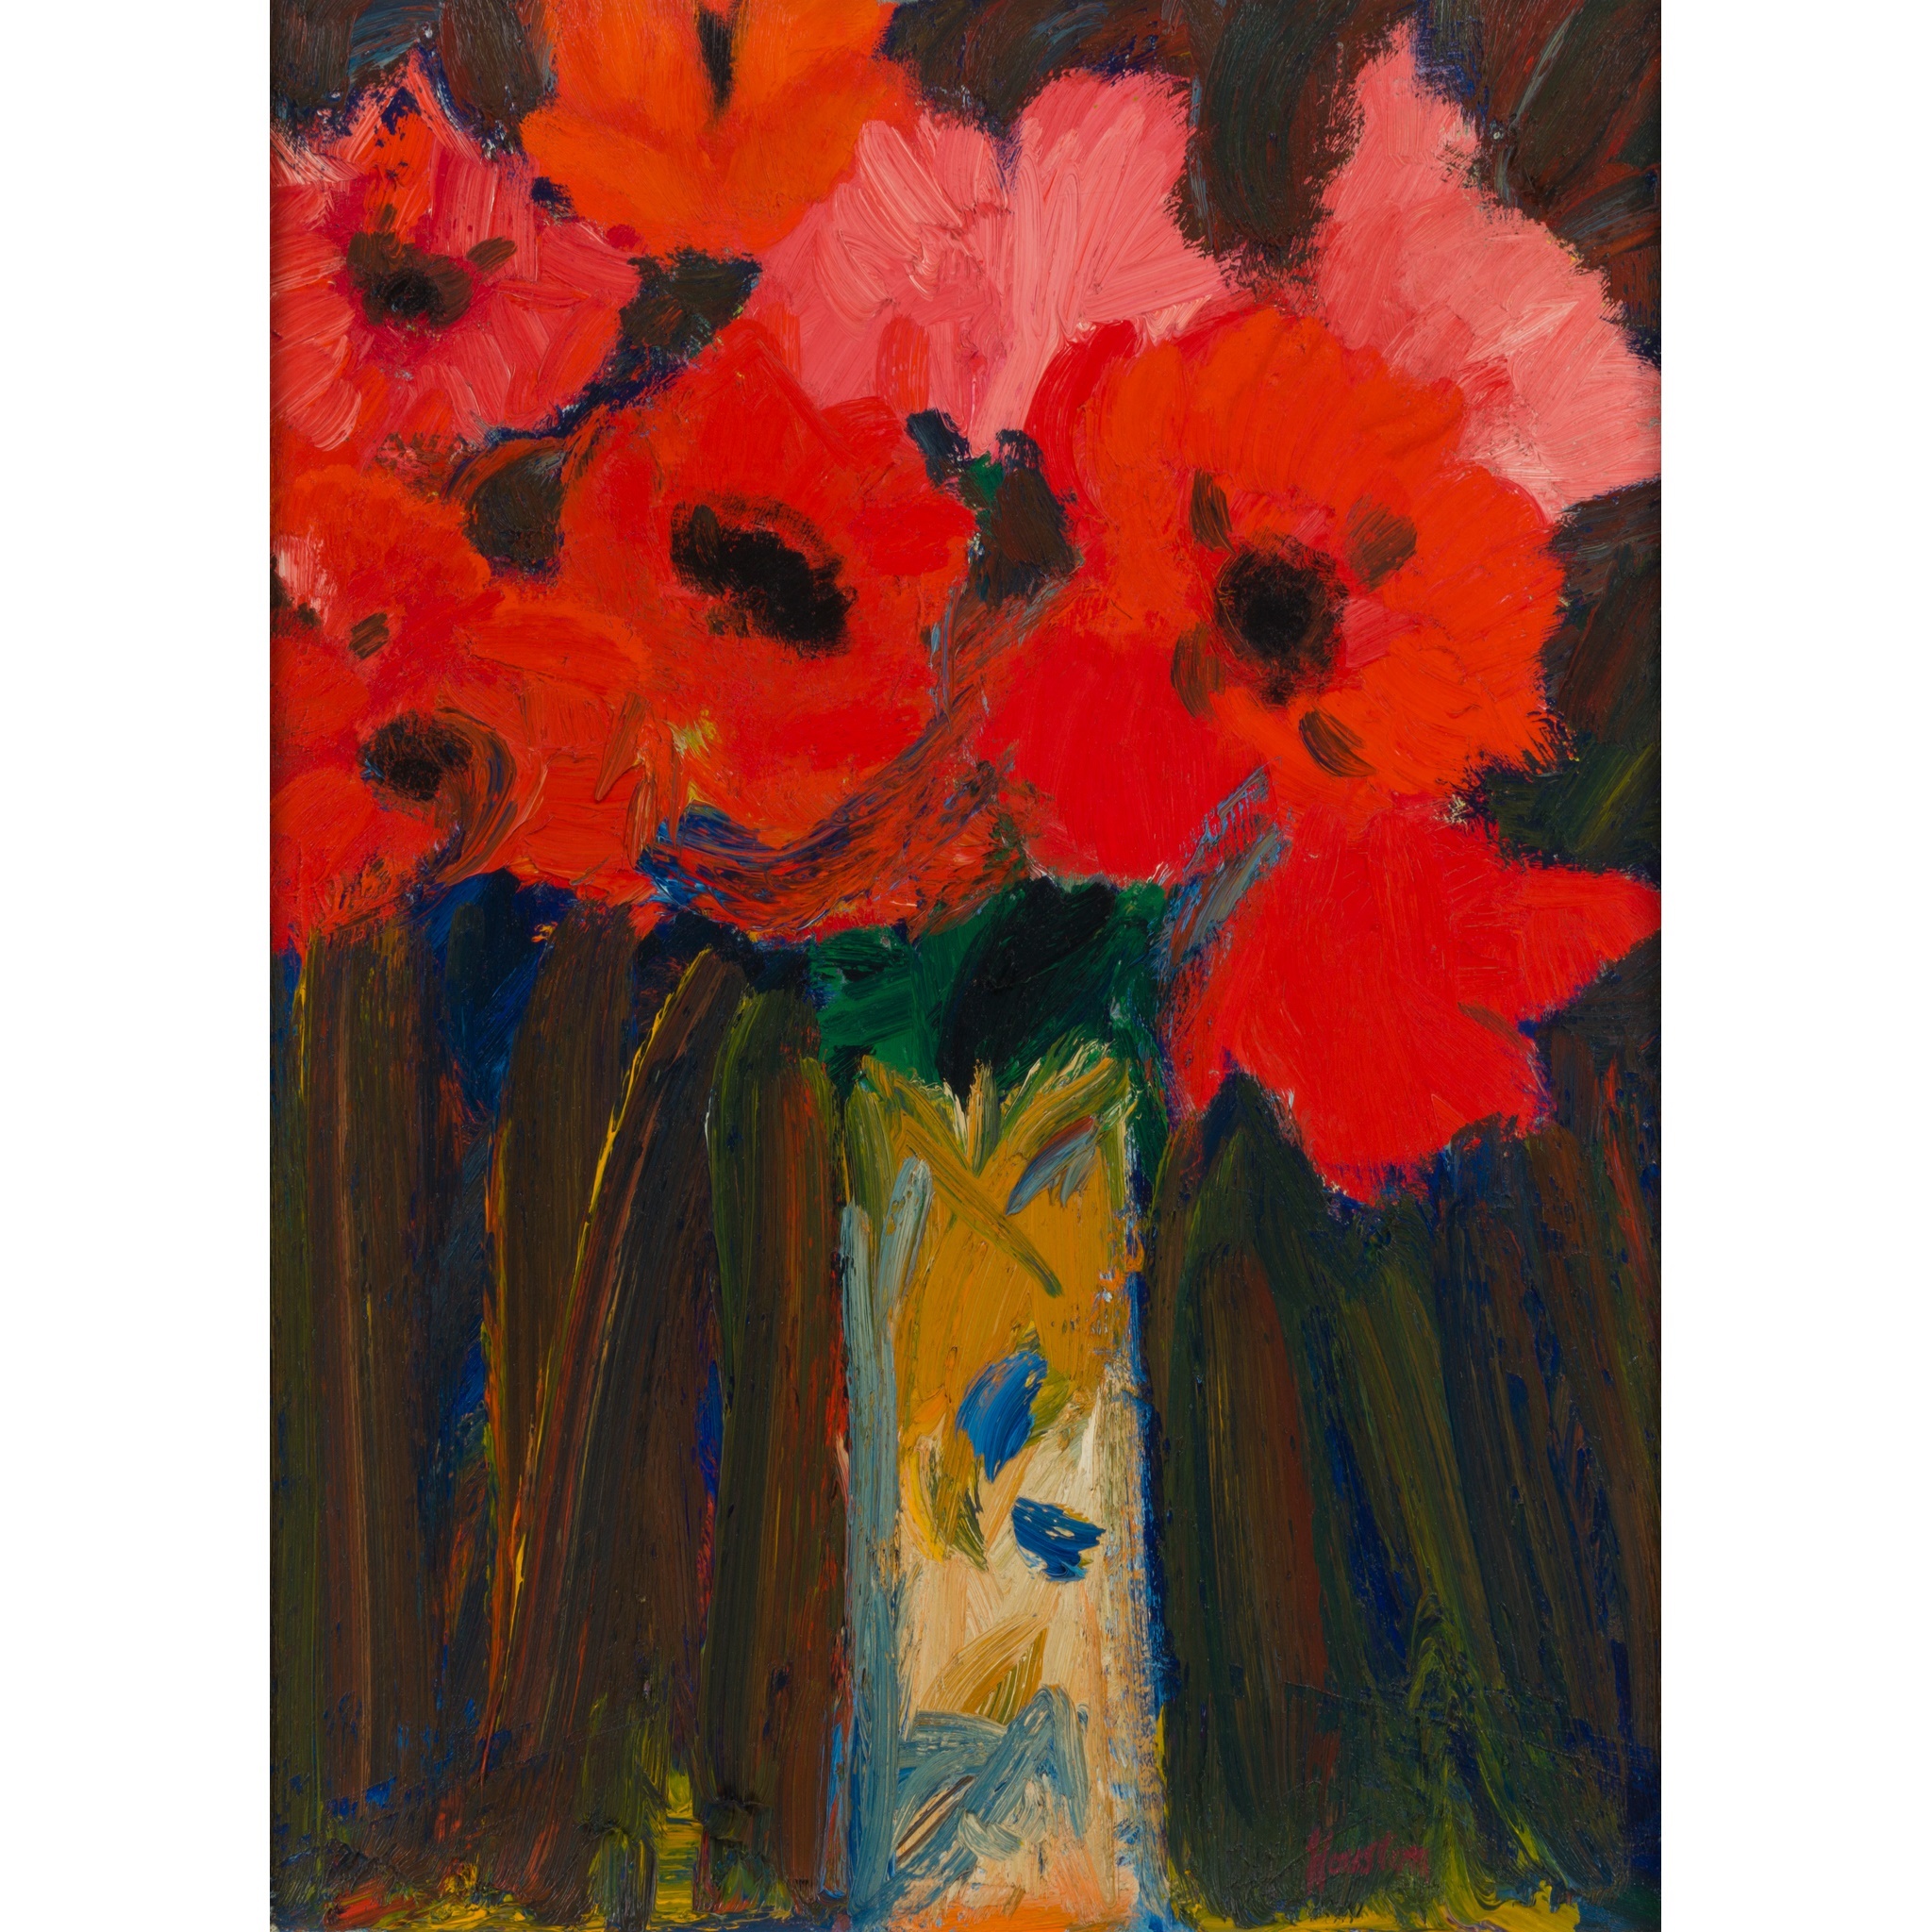 JOHN HOUSTON R.S.A., R.S.W., S.S.A. (SCOTTISH 1930-2008) | ORIENTAL POPPIES 1 Signed, signed, inscribed and dated on the stretcher 1984, oil on canvas | 51cm x 41cm (20in x 16in) | Exhibited: Mercury Gallery, London 1986; Dr. Ruth Page until 2015 | Sold for £10,625 + fees